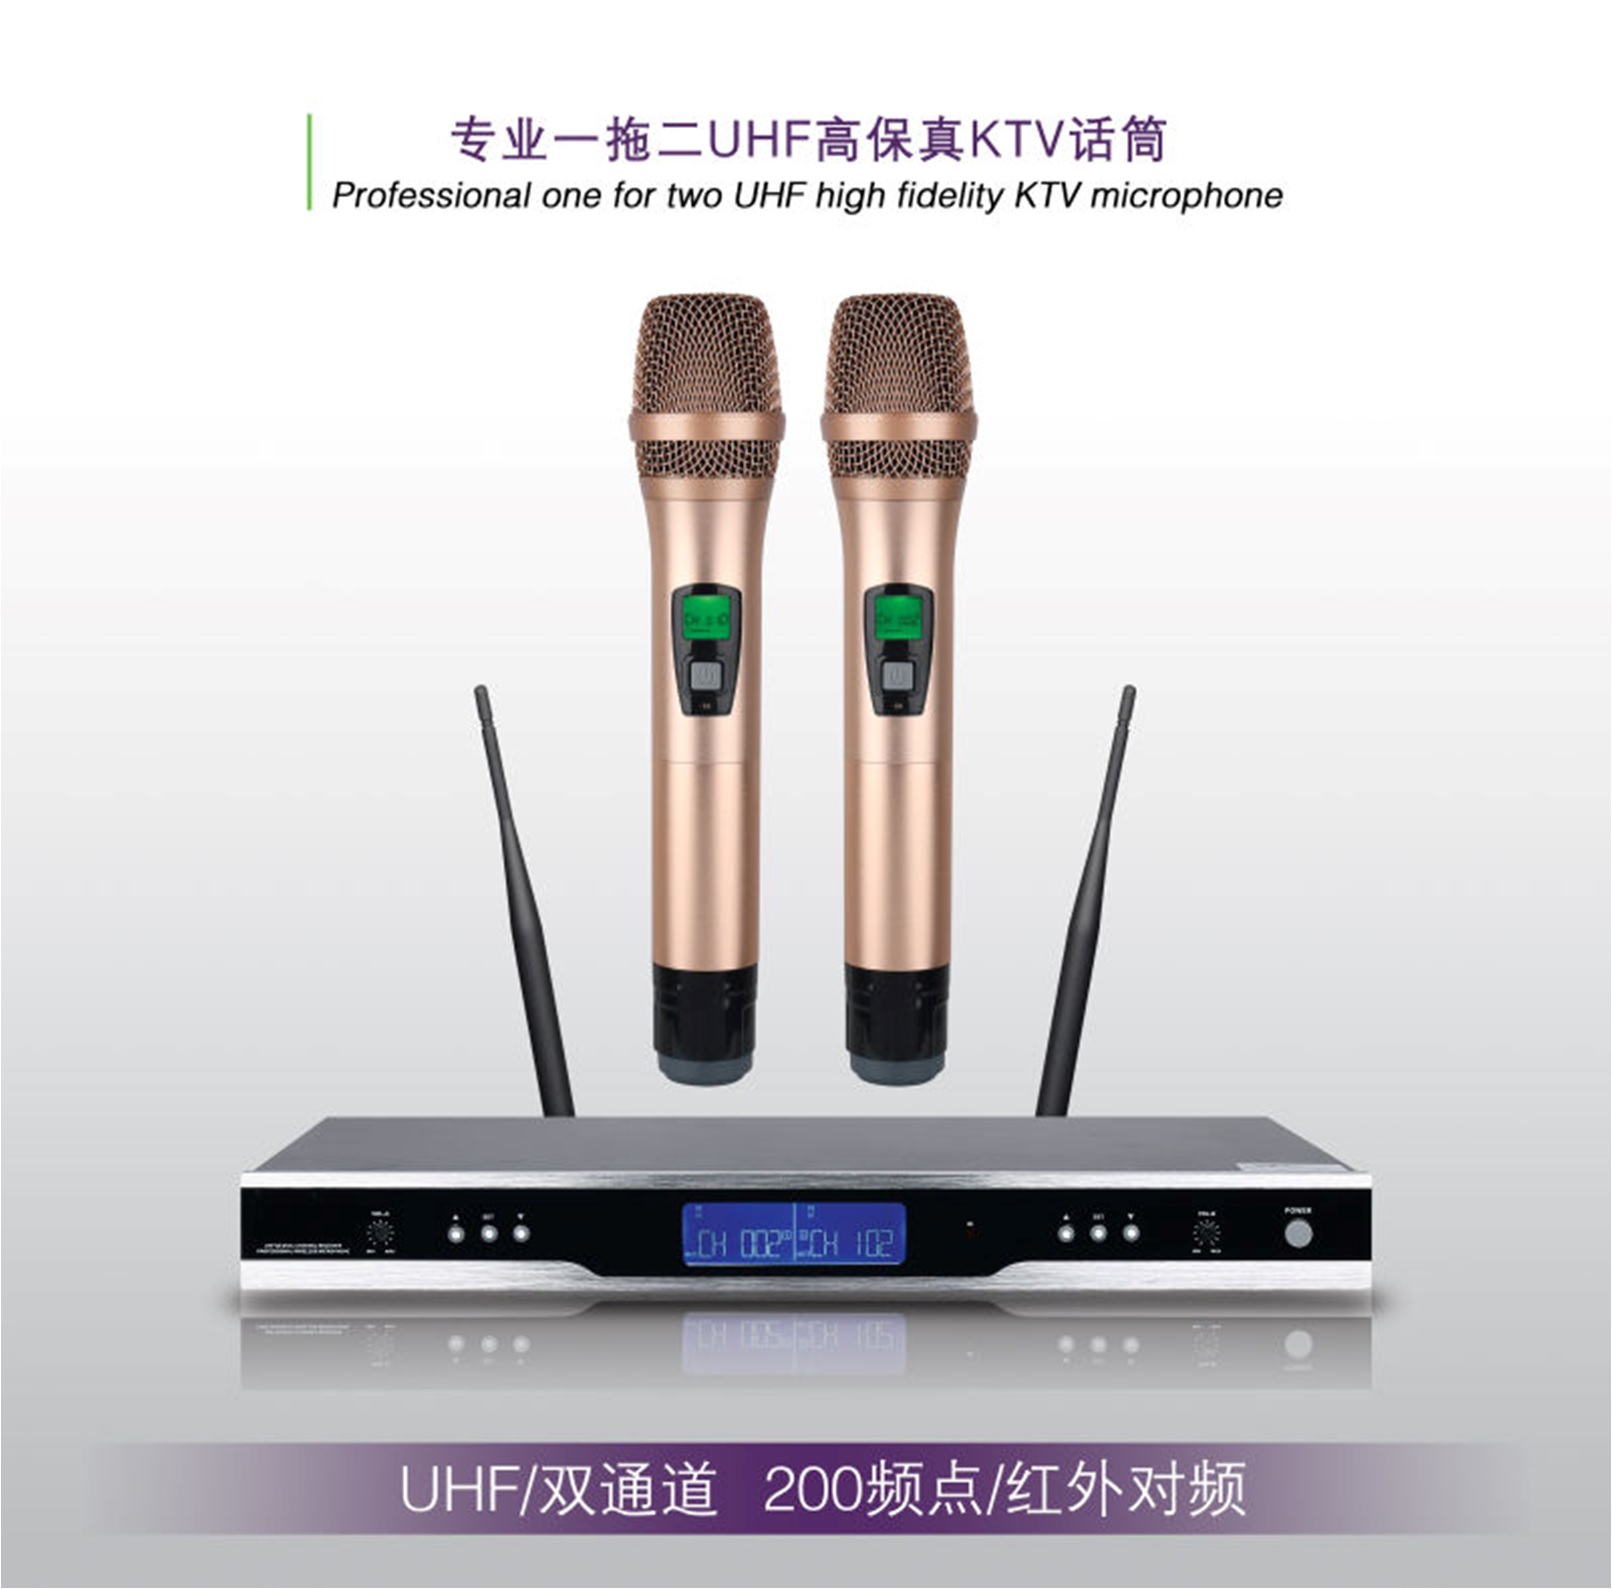 Full intelligent professional KTV stage wireless microphone U segment FM one for two infrared automatic frequency wireless microphone Full intelligent professional KTV stage wireless microphone U segment FM one for two infrared automatic frequency wireless microphone